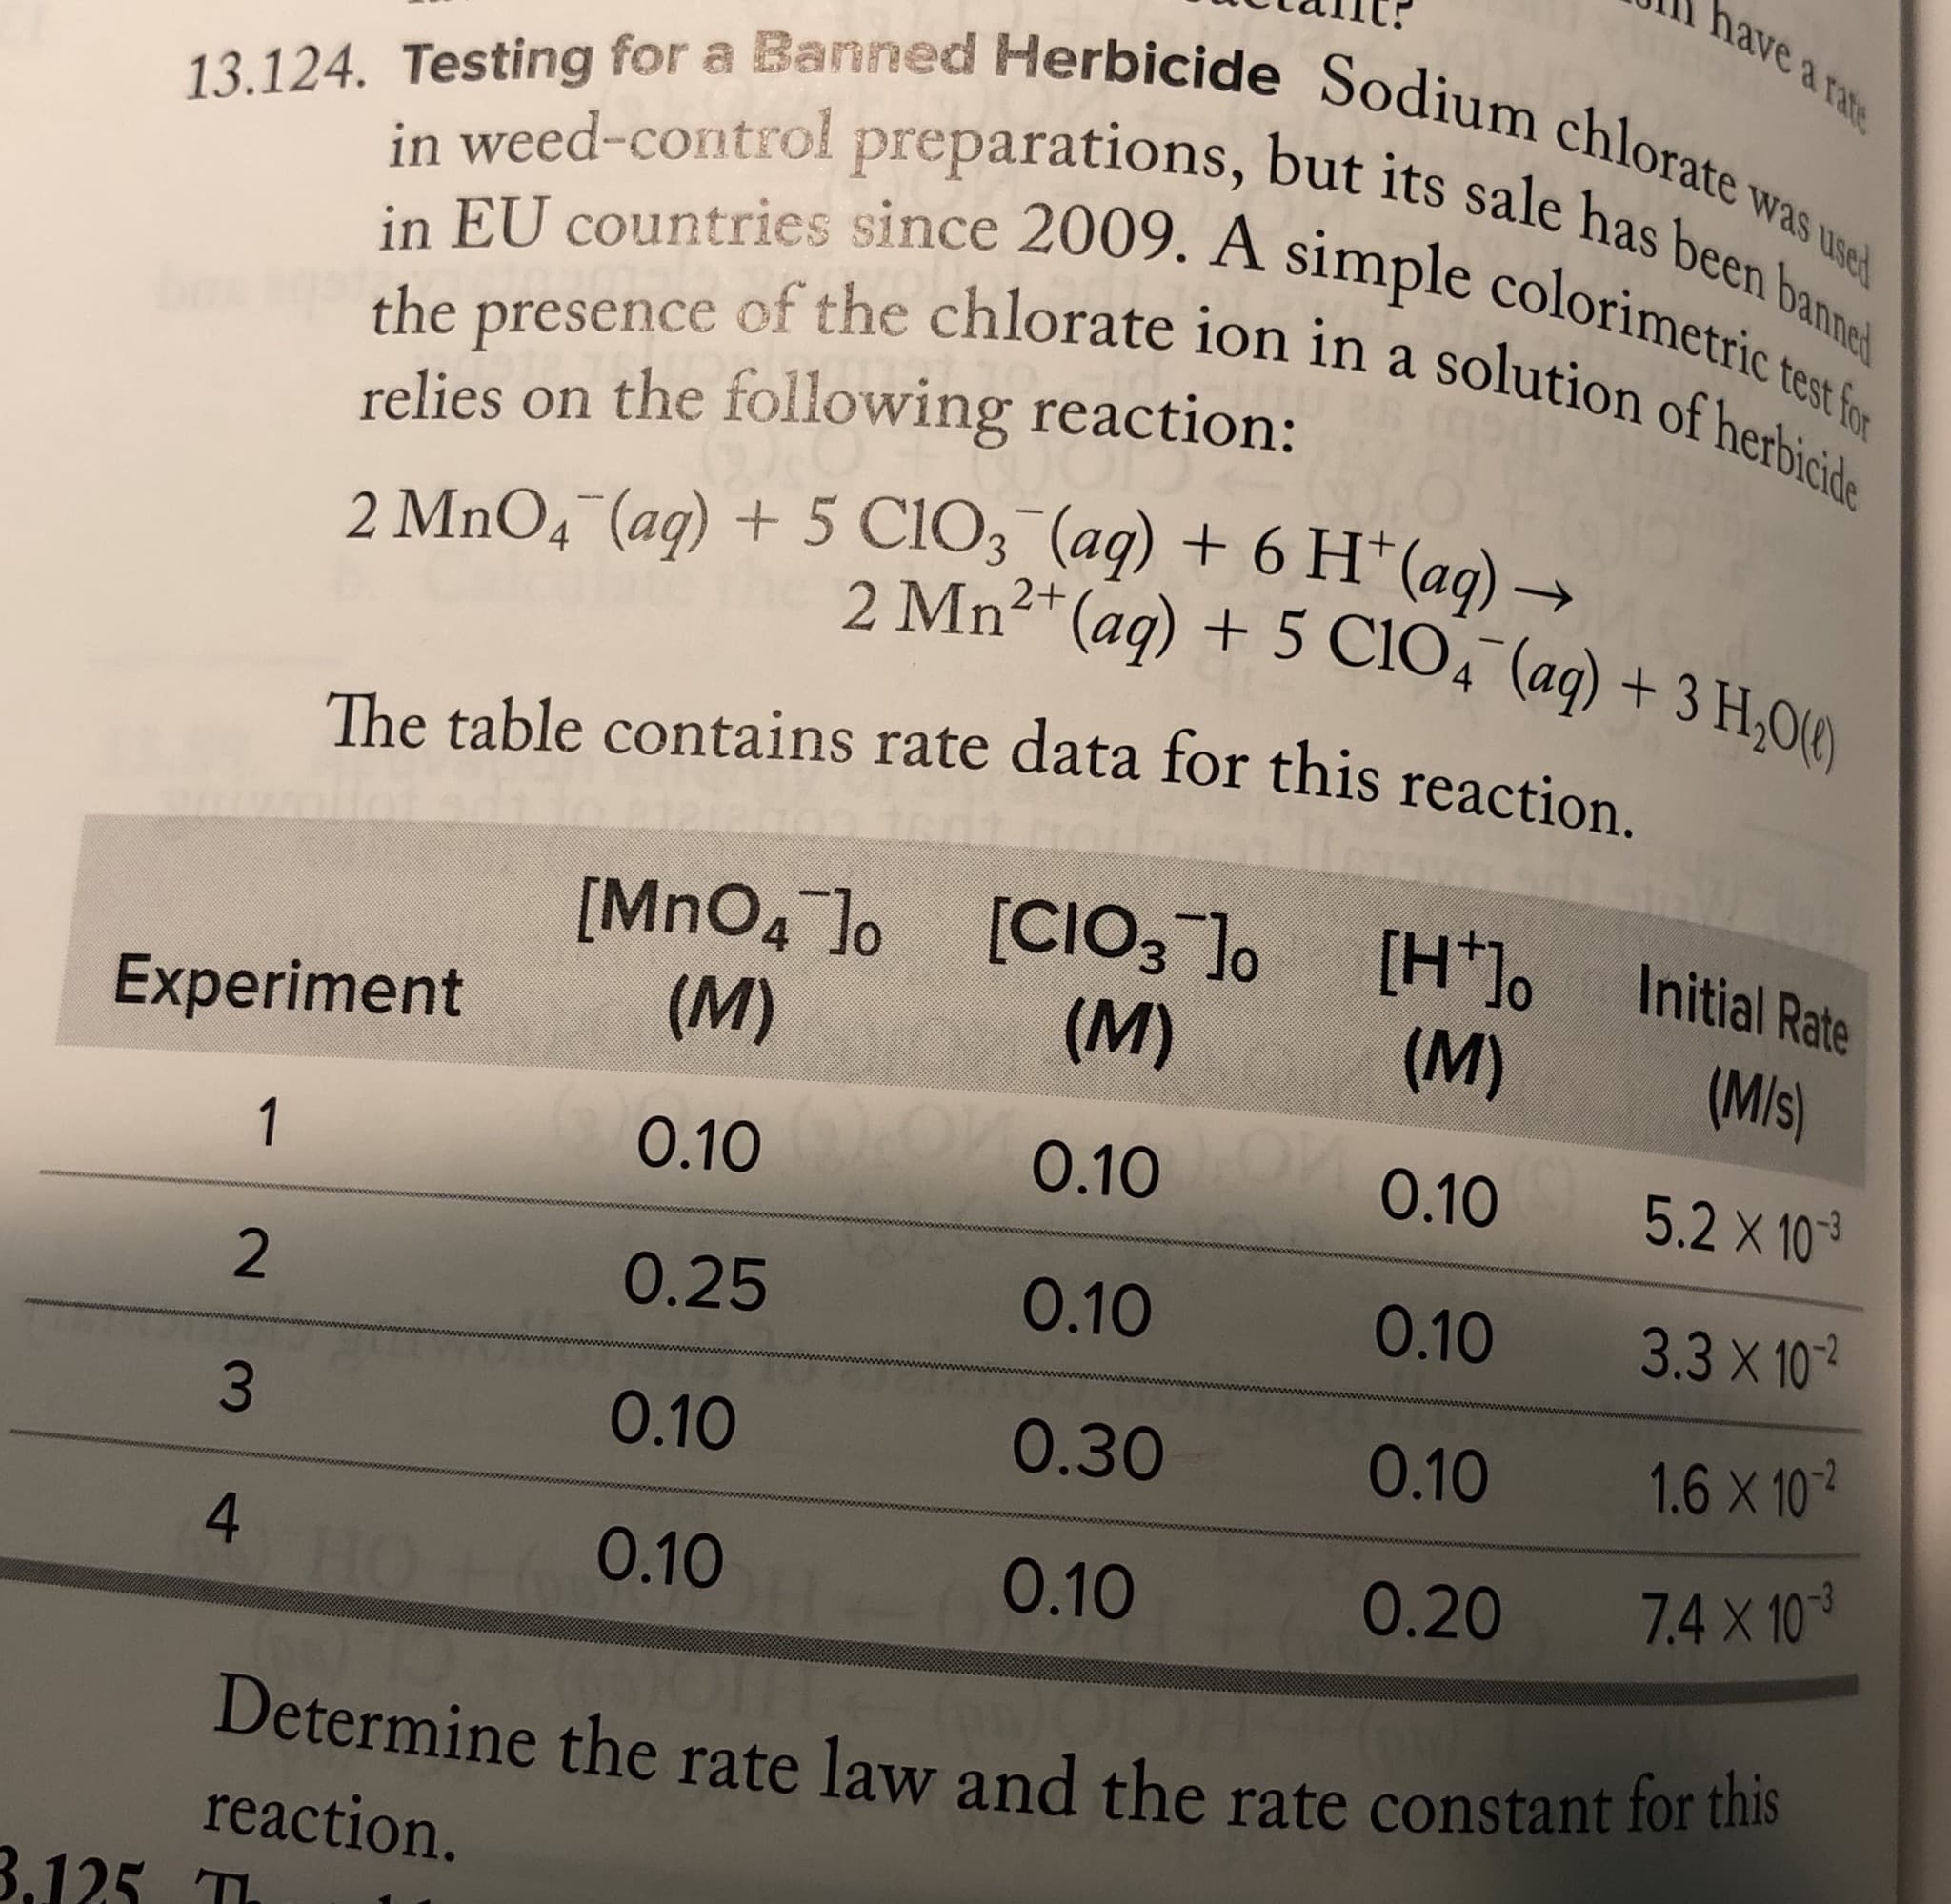 have a rate
13.124. Testing for a Banned Herbicide Sodium chlorate w
in EU countries since 2009. A simple colorimetric test for
the presence of the chlorate ion in a solution of herbicide
was used
relies on the following reaction:
2 MnO4 (ag) + 5 C103 (aq) + 6 H*(aq) →
2 Mn2+ (aq) + 5 C104¯(ag) + 3 H,0(0)
The table contains rate data for this reaction.
[CIO3 ]o
(M)
[H*]%
(M)
Initial Rate
[MnO4 lo
(M)
(Mis)
Experiment
5.2 X 10
0.10
0.10
0.10
1
3.3x 10
0.10
0.10
0.25
1.6 x 10
0.10
0.30
0.10
7.4 X 103
0.20
0.10
0.10
4
HO
THE
Determine the rate law and the rate constant for this
reaction.
3,125 T
3.
